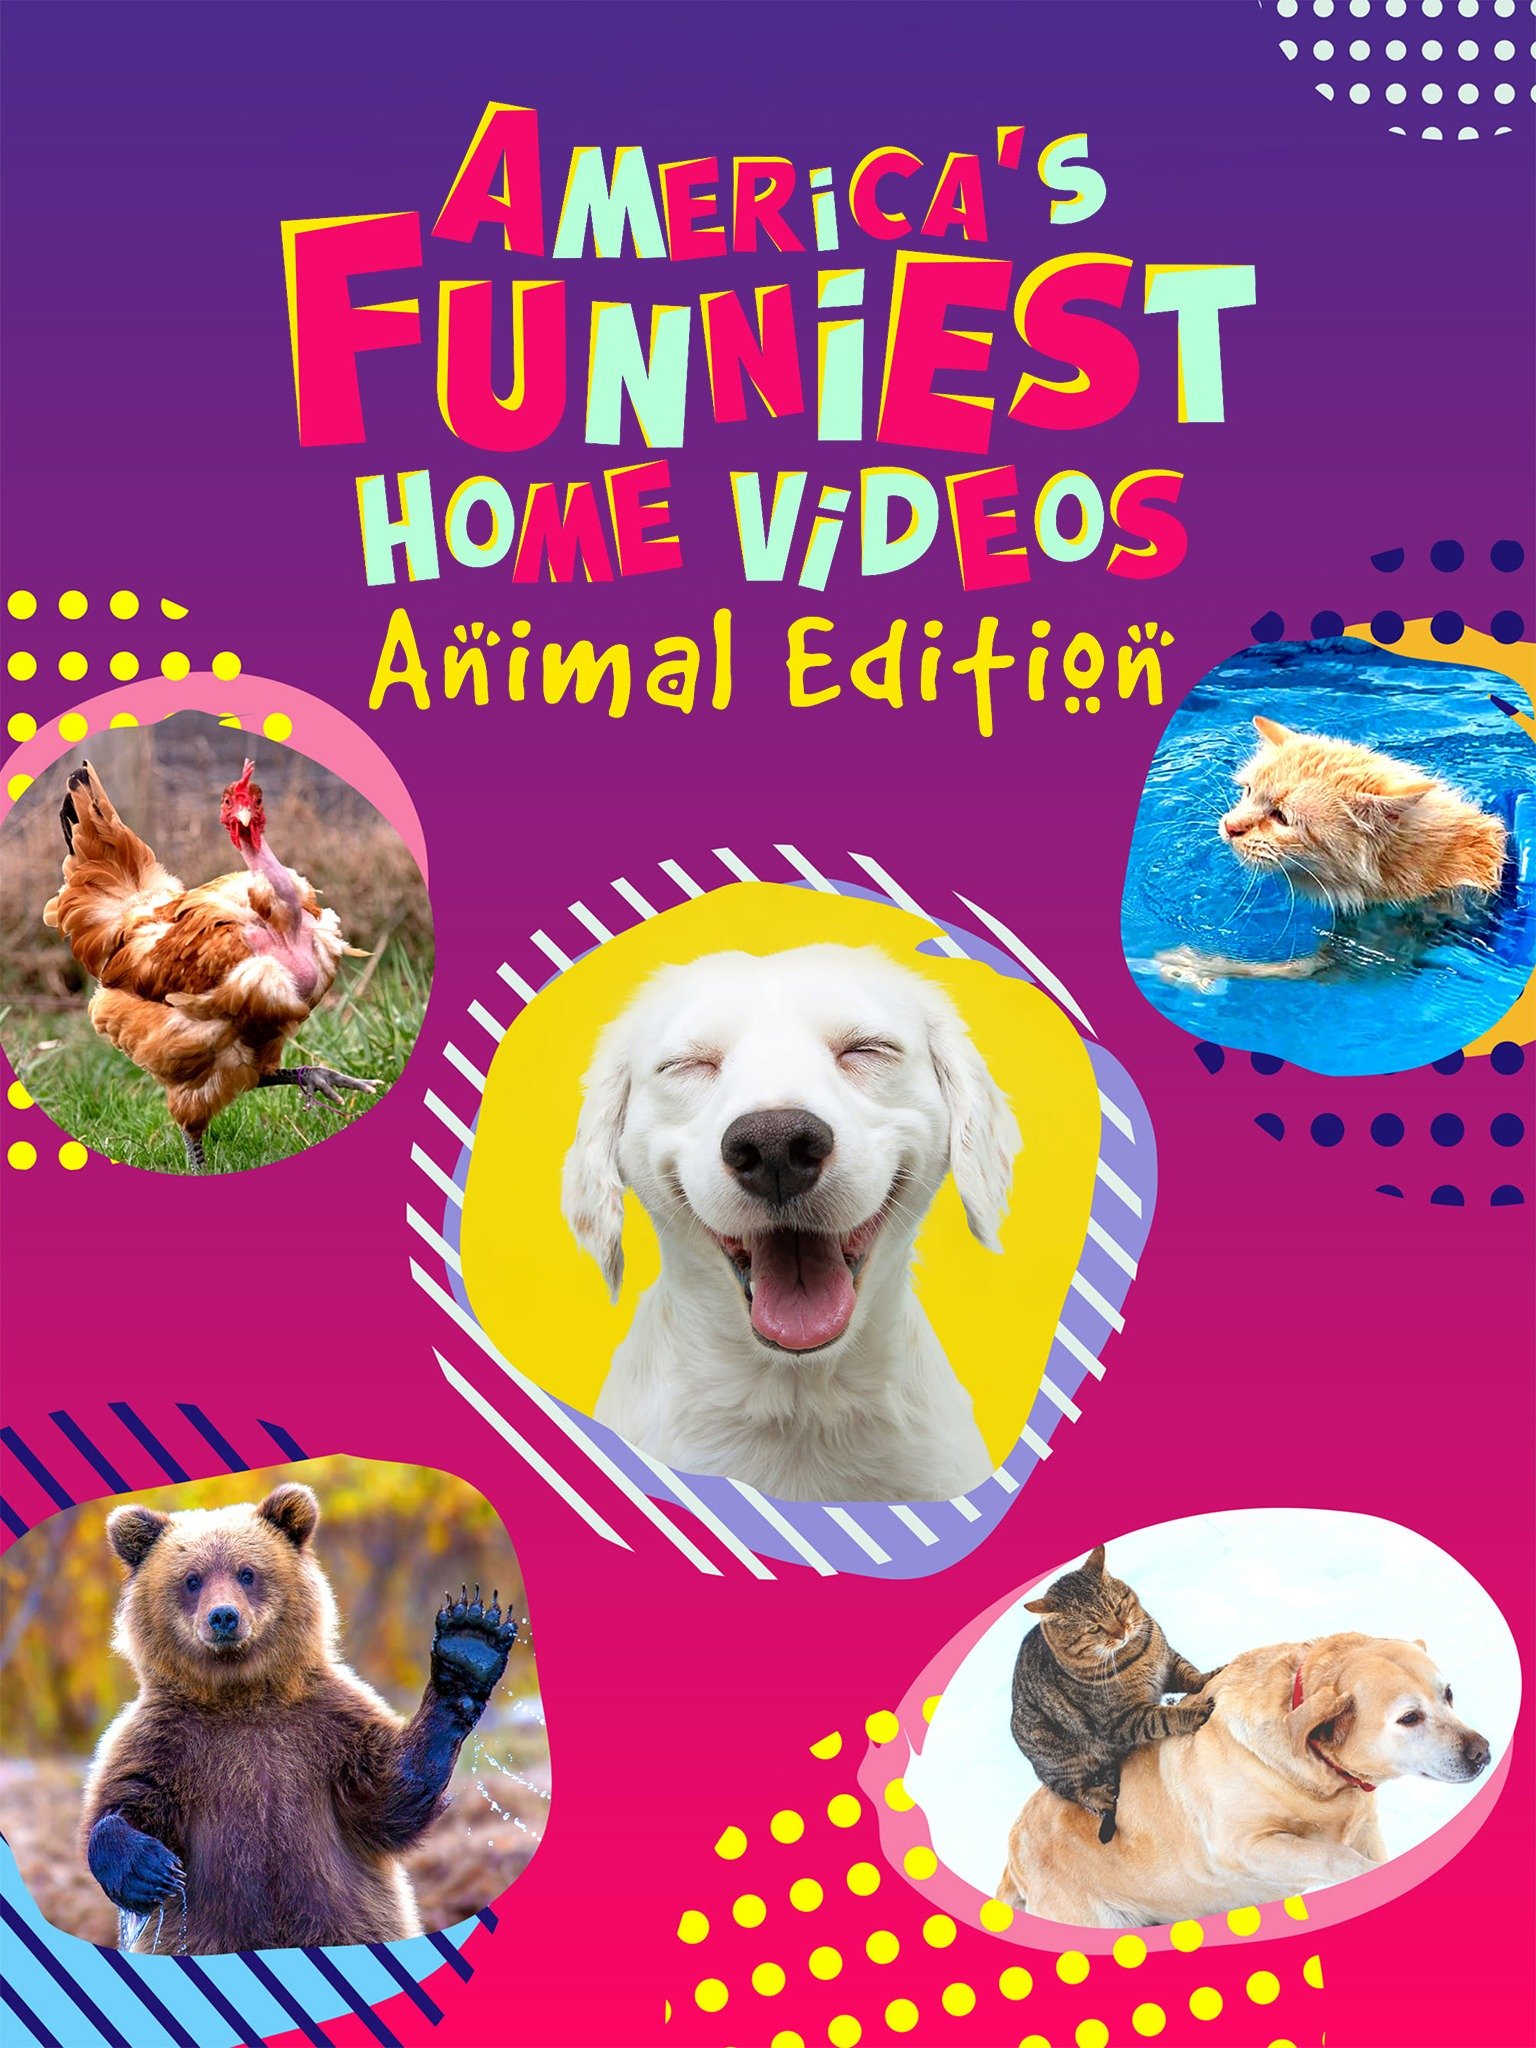 America's Funniest Home Videos: Animal Edition - Rotten Tomatoes